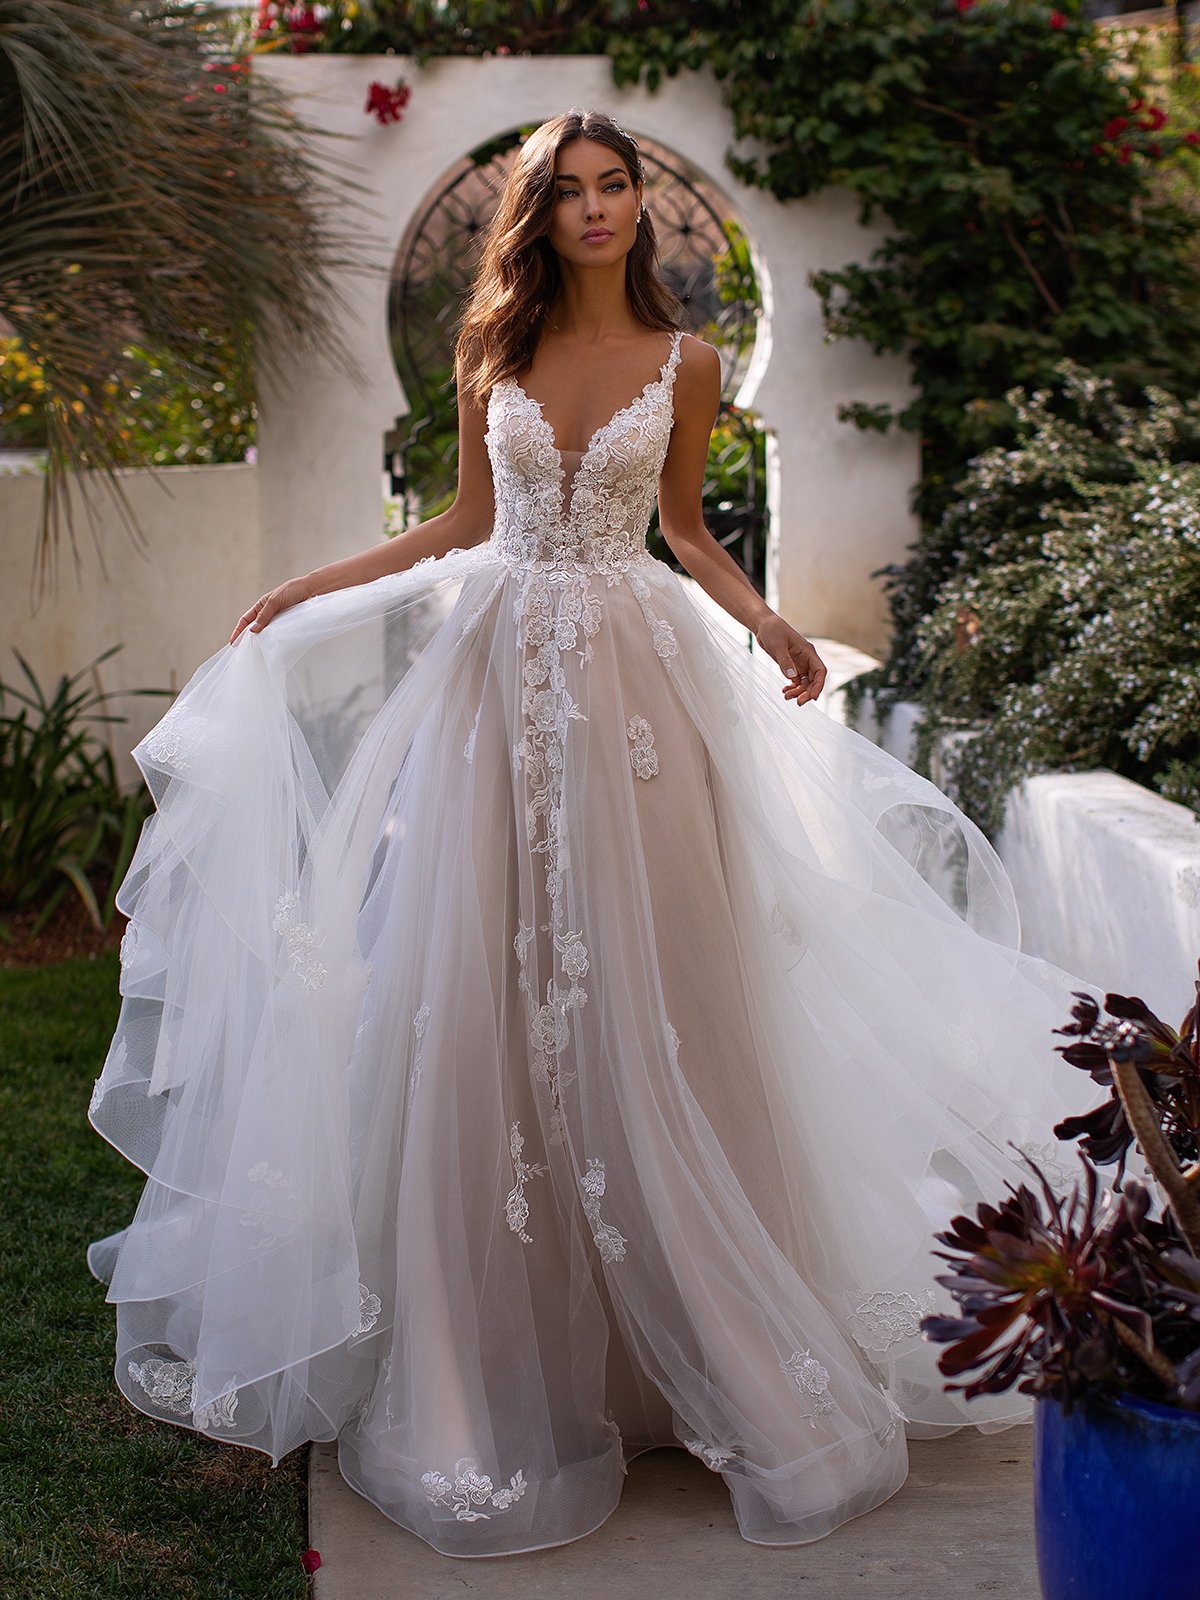 Lace Wedding Dress Styles & Trends in 2022